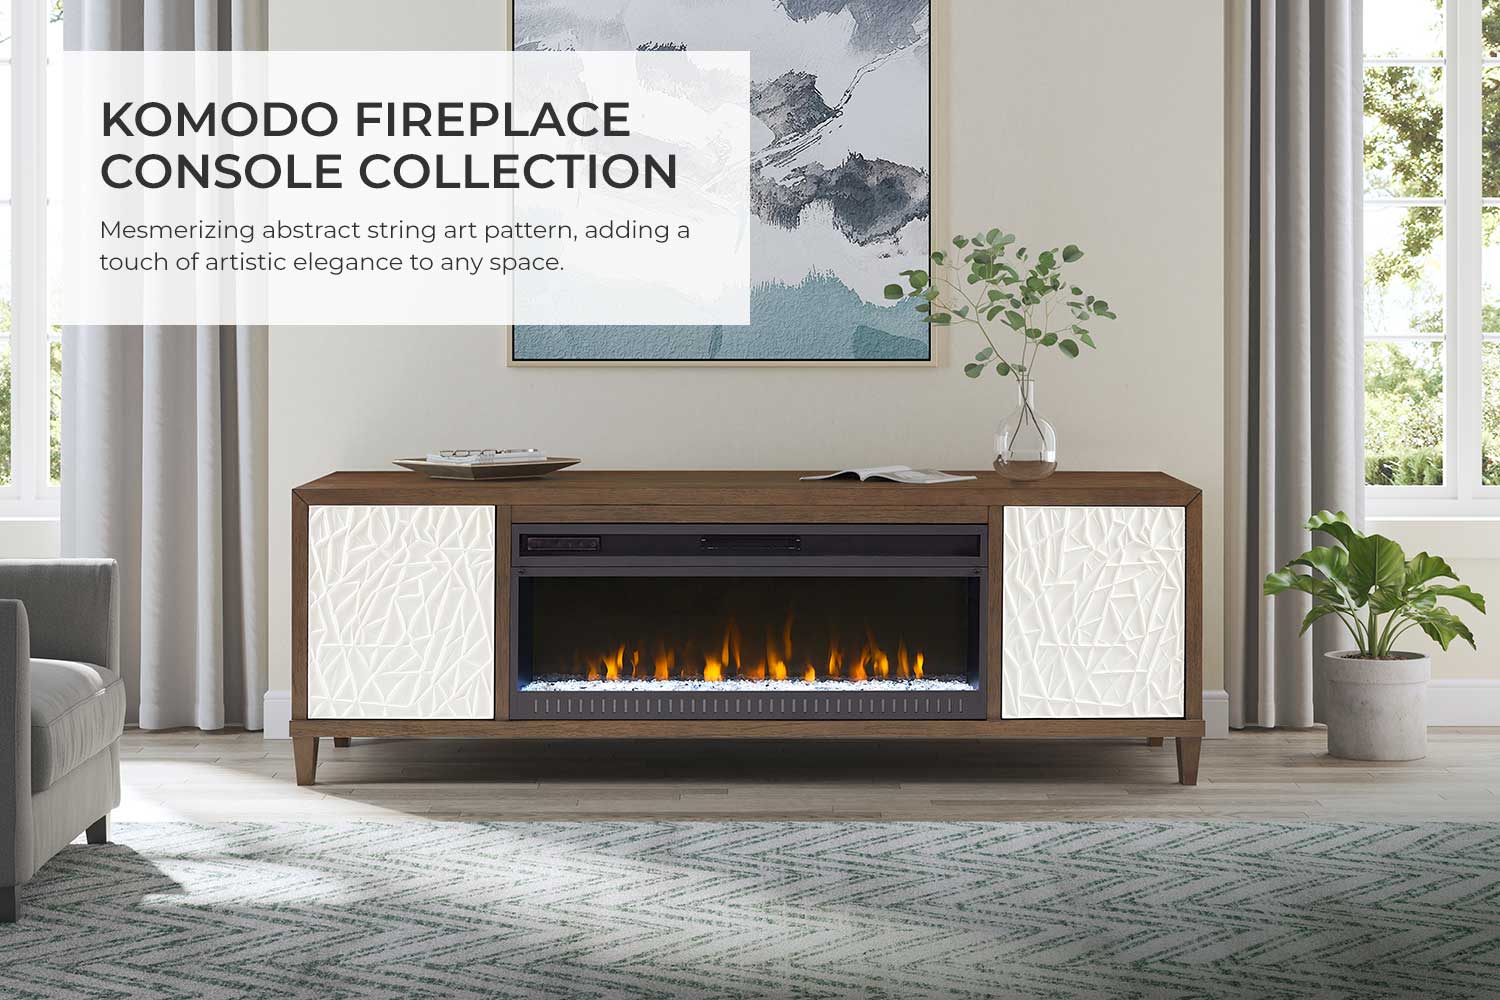 Komodo Fireplace Console Collection